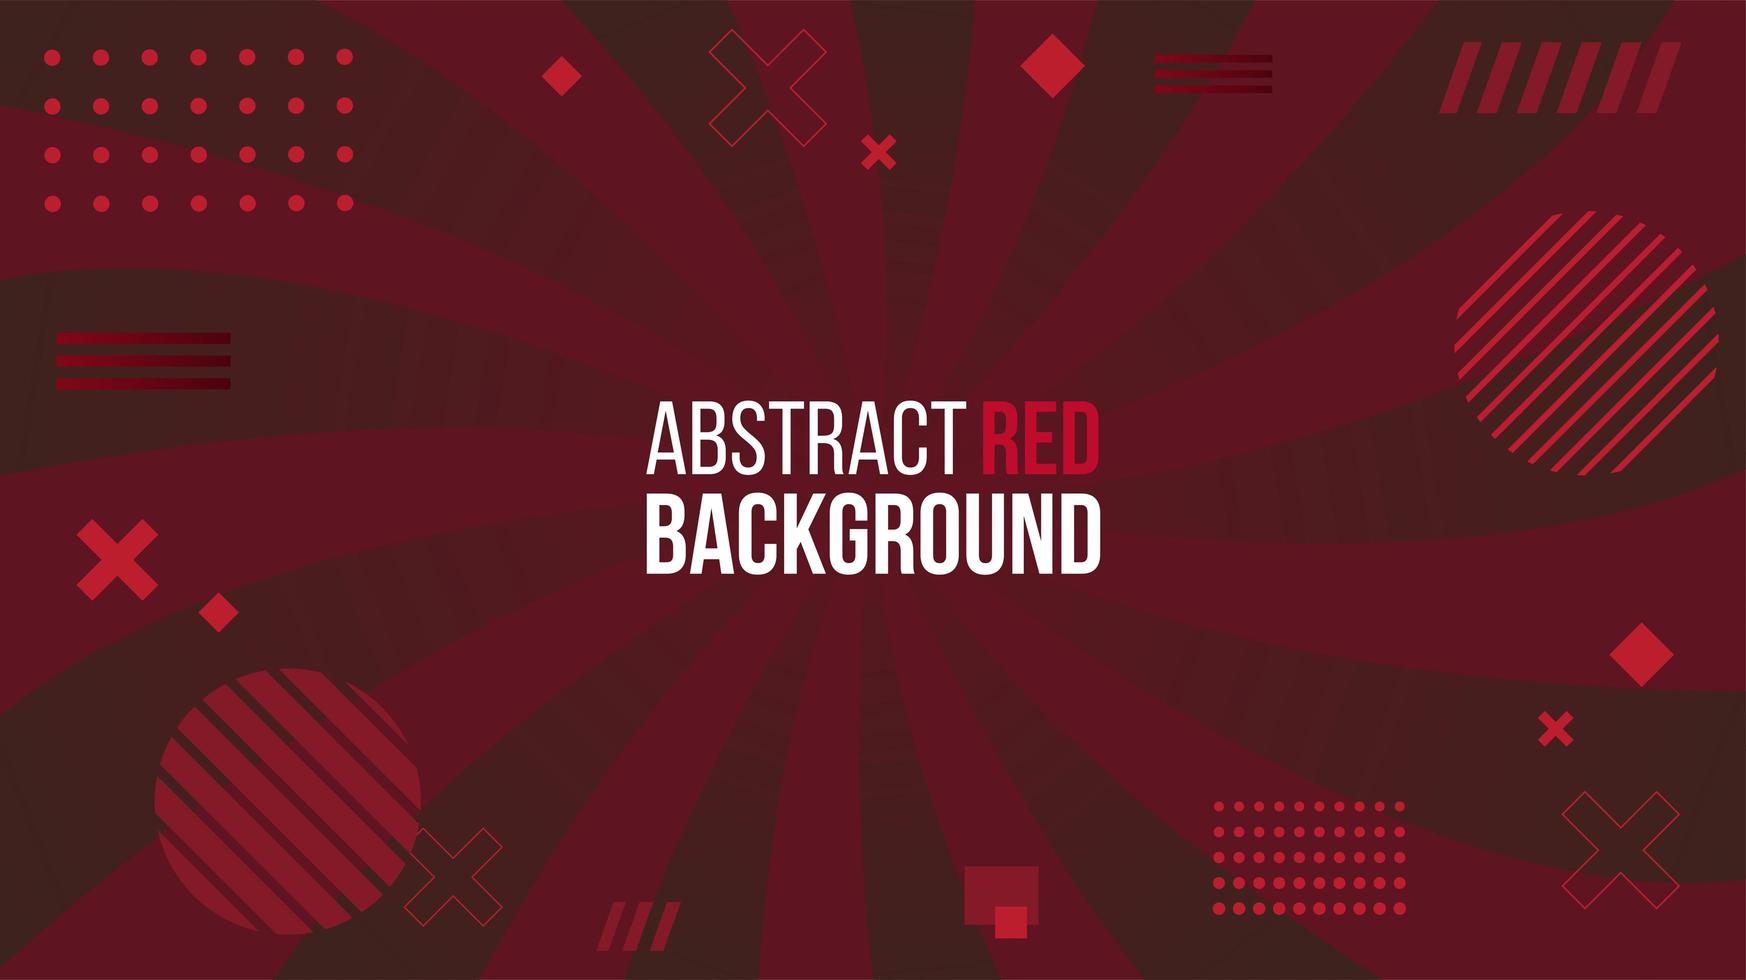 Abstract red background with geometric shapes vector